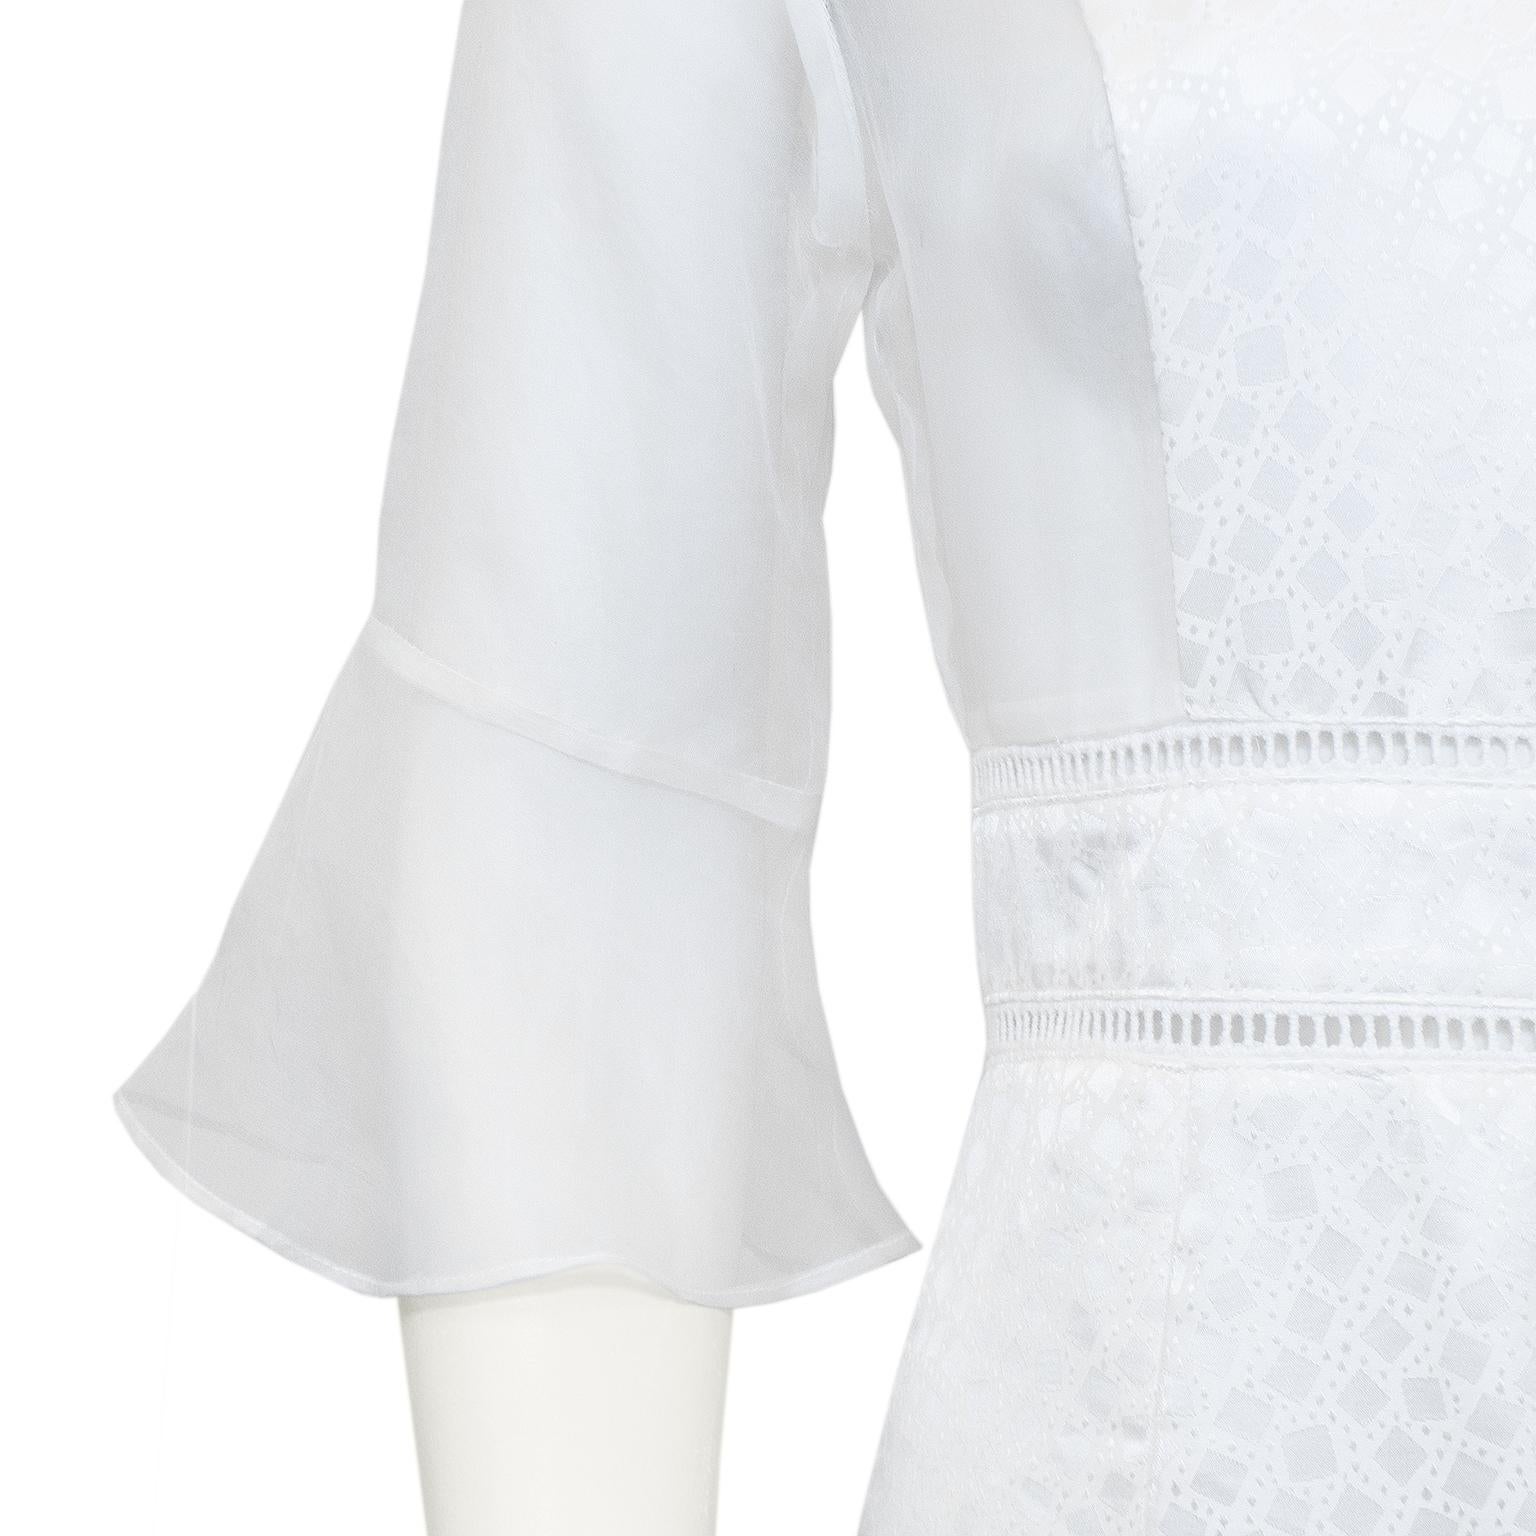 Spring/Summer 2015 White Embroidered Silk Jacquard and Chiffon Dress   In Good Condition For Sale In Toronto, Ontario